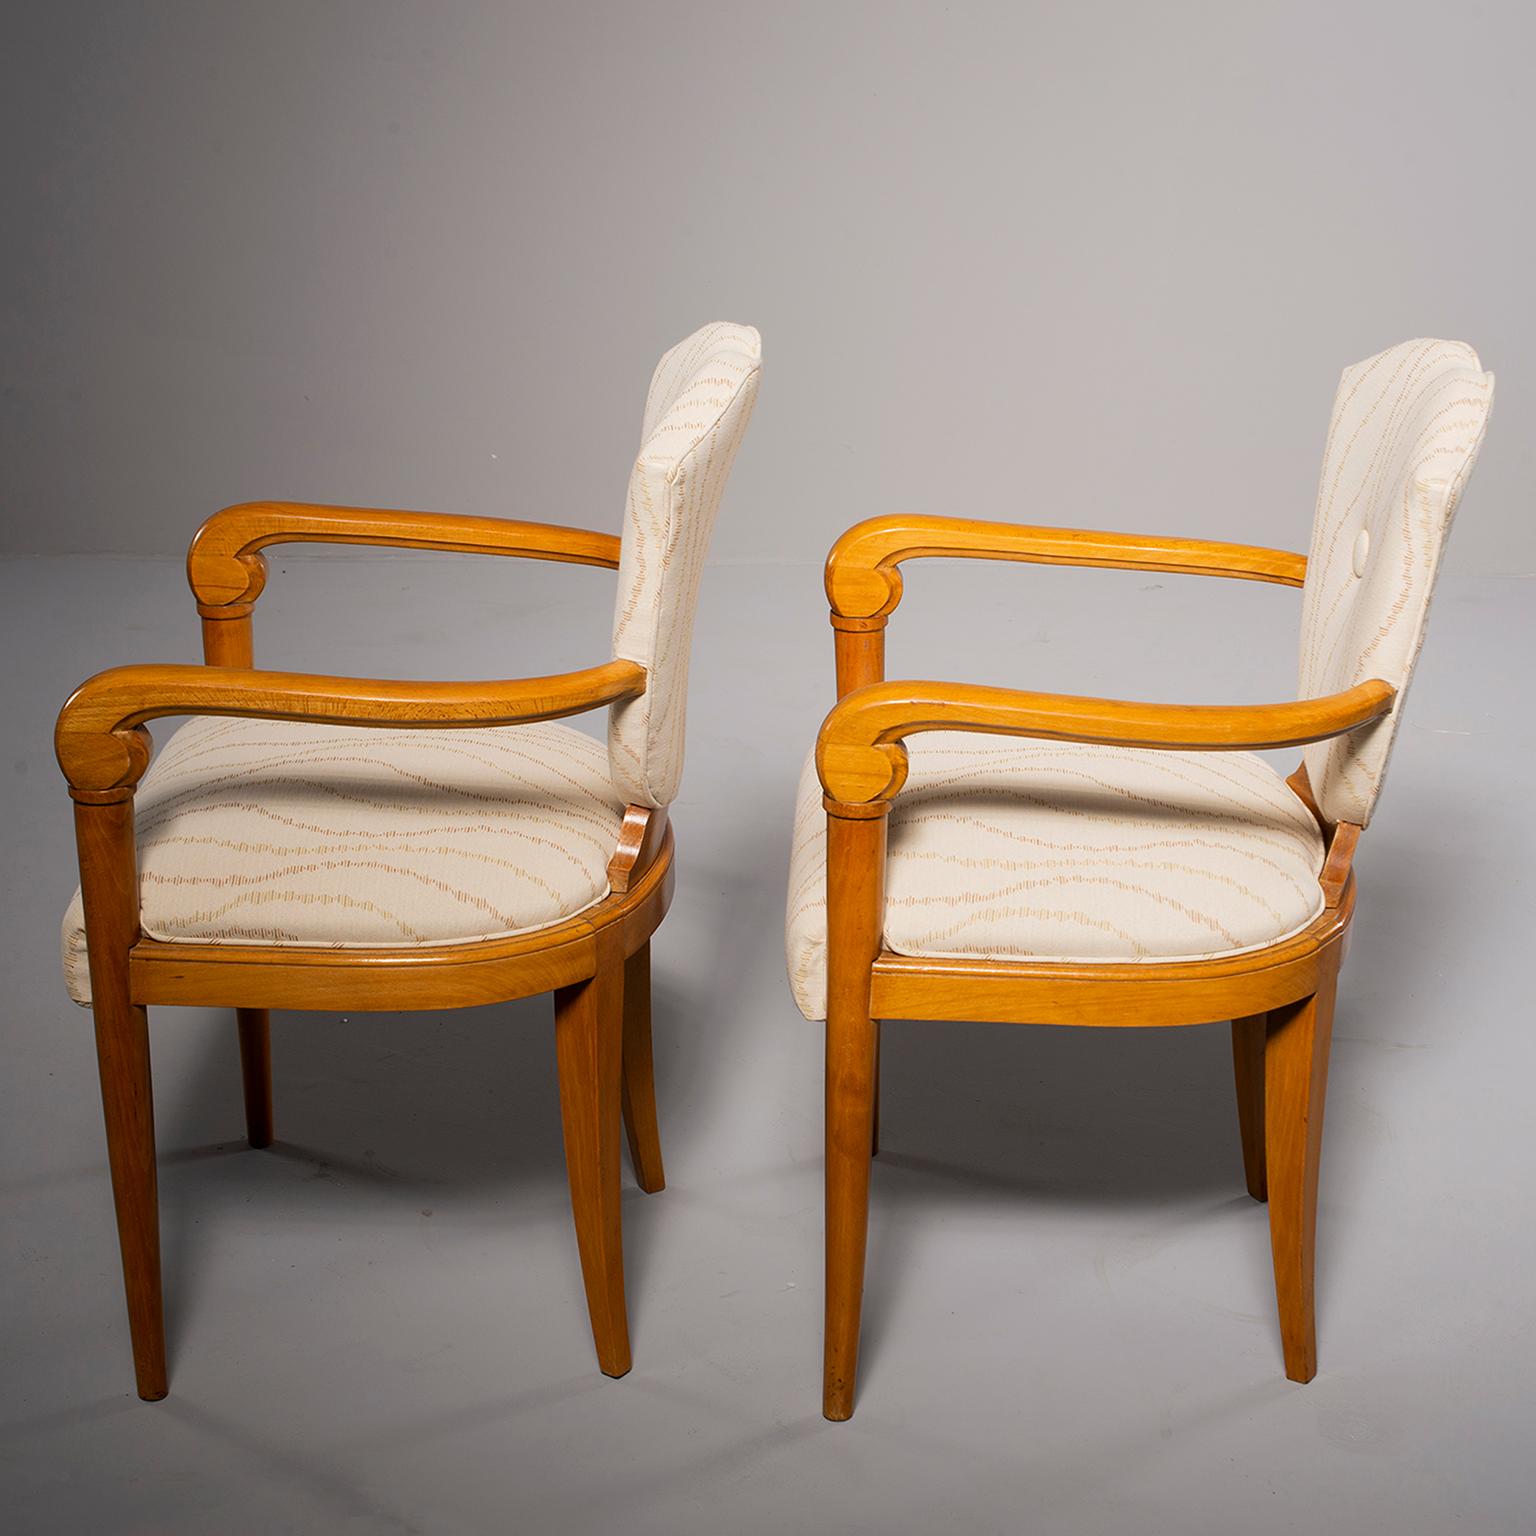 Pair of French Bridge Chairs with Beech Frames and New Upholstery In Good Condition For Sale In Troy, MI